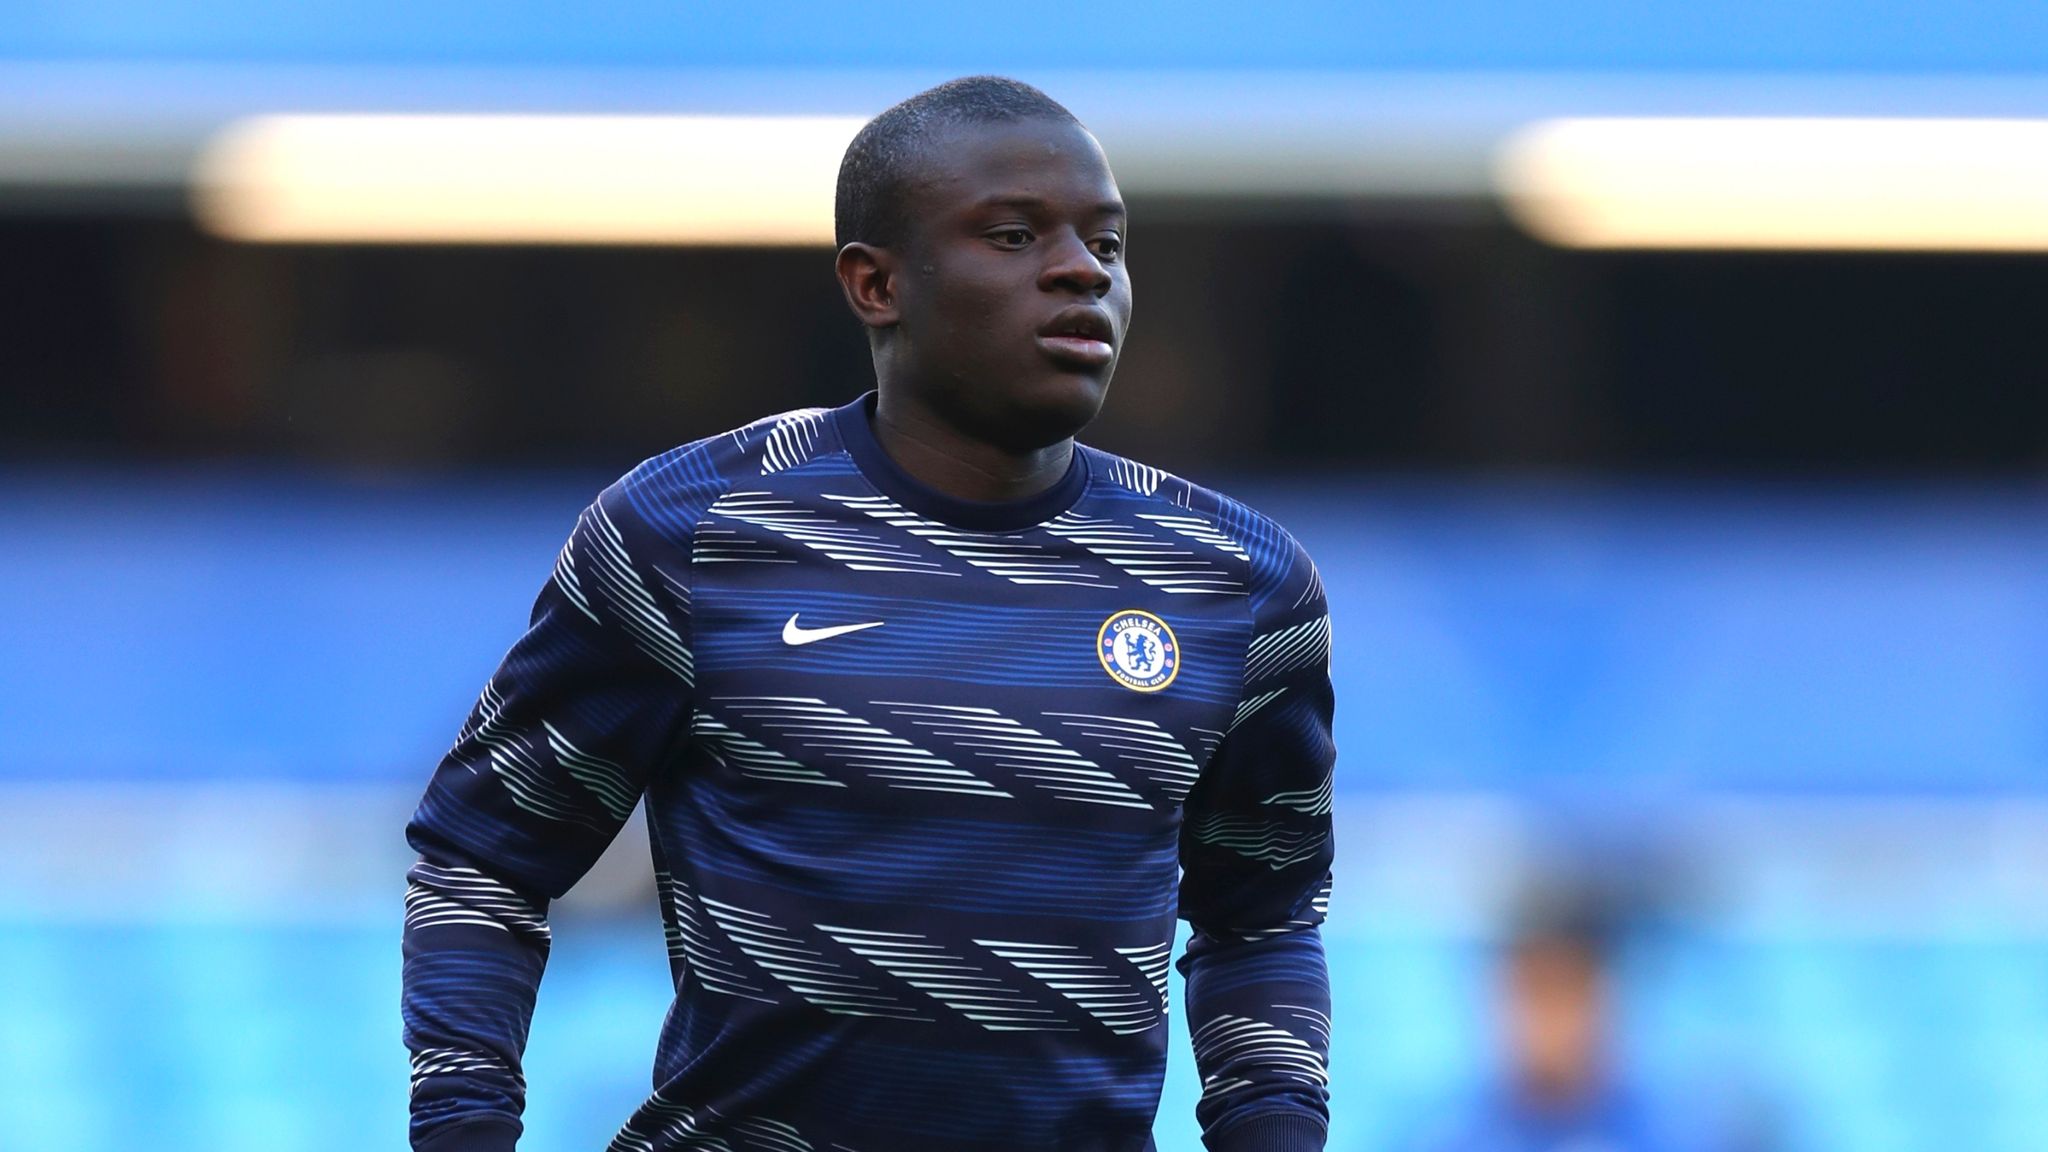 N Golo Kante Thomas Tuchel Says Chelsea Midfielder Must Prove His Fitness To Be Involved Against Porto Football News Sky Sports